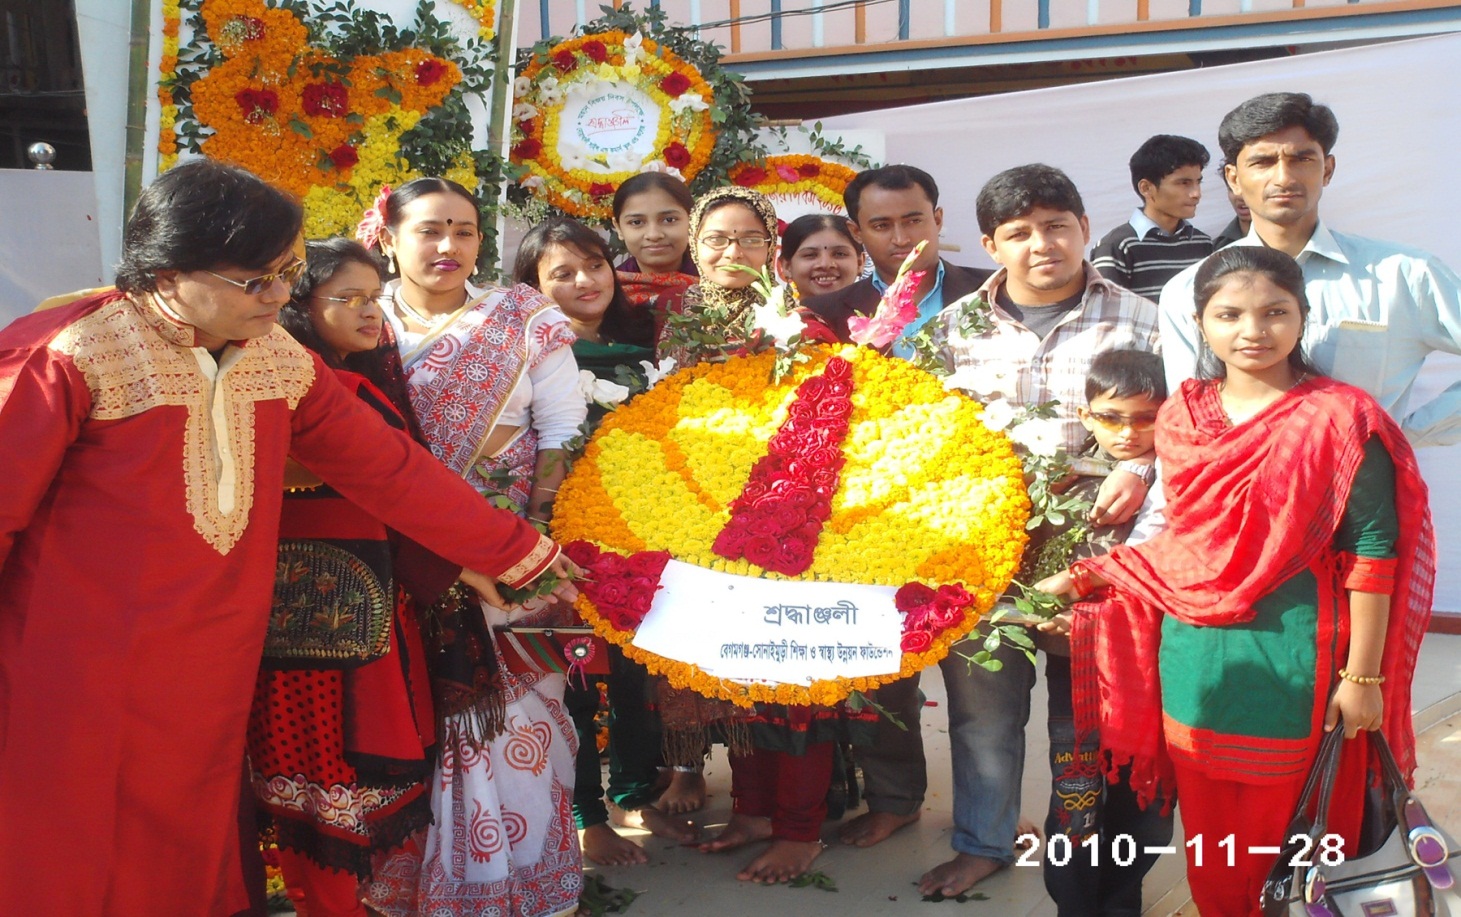 In the Pictrue- Chairman of Begamganj-Sonaimuri Shikkha O Sastha Unnayan Foundation and Begumganj Technical and Computer Institute Principal Gias Uddin Mithu offering flowers at the Central Shaheed Minar on the occasion of Victory Day.